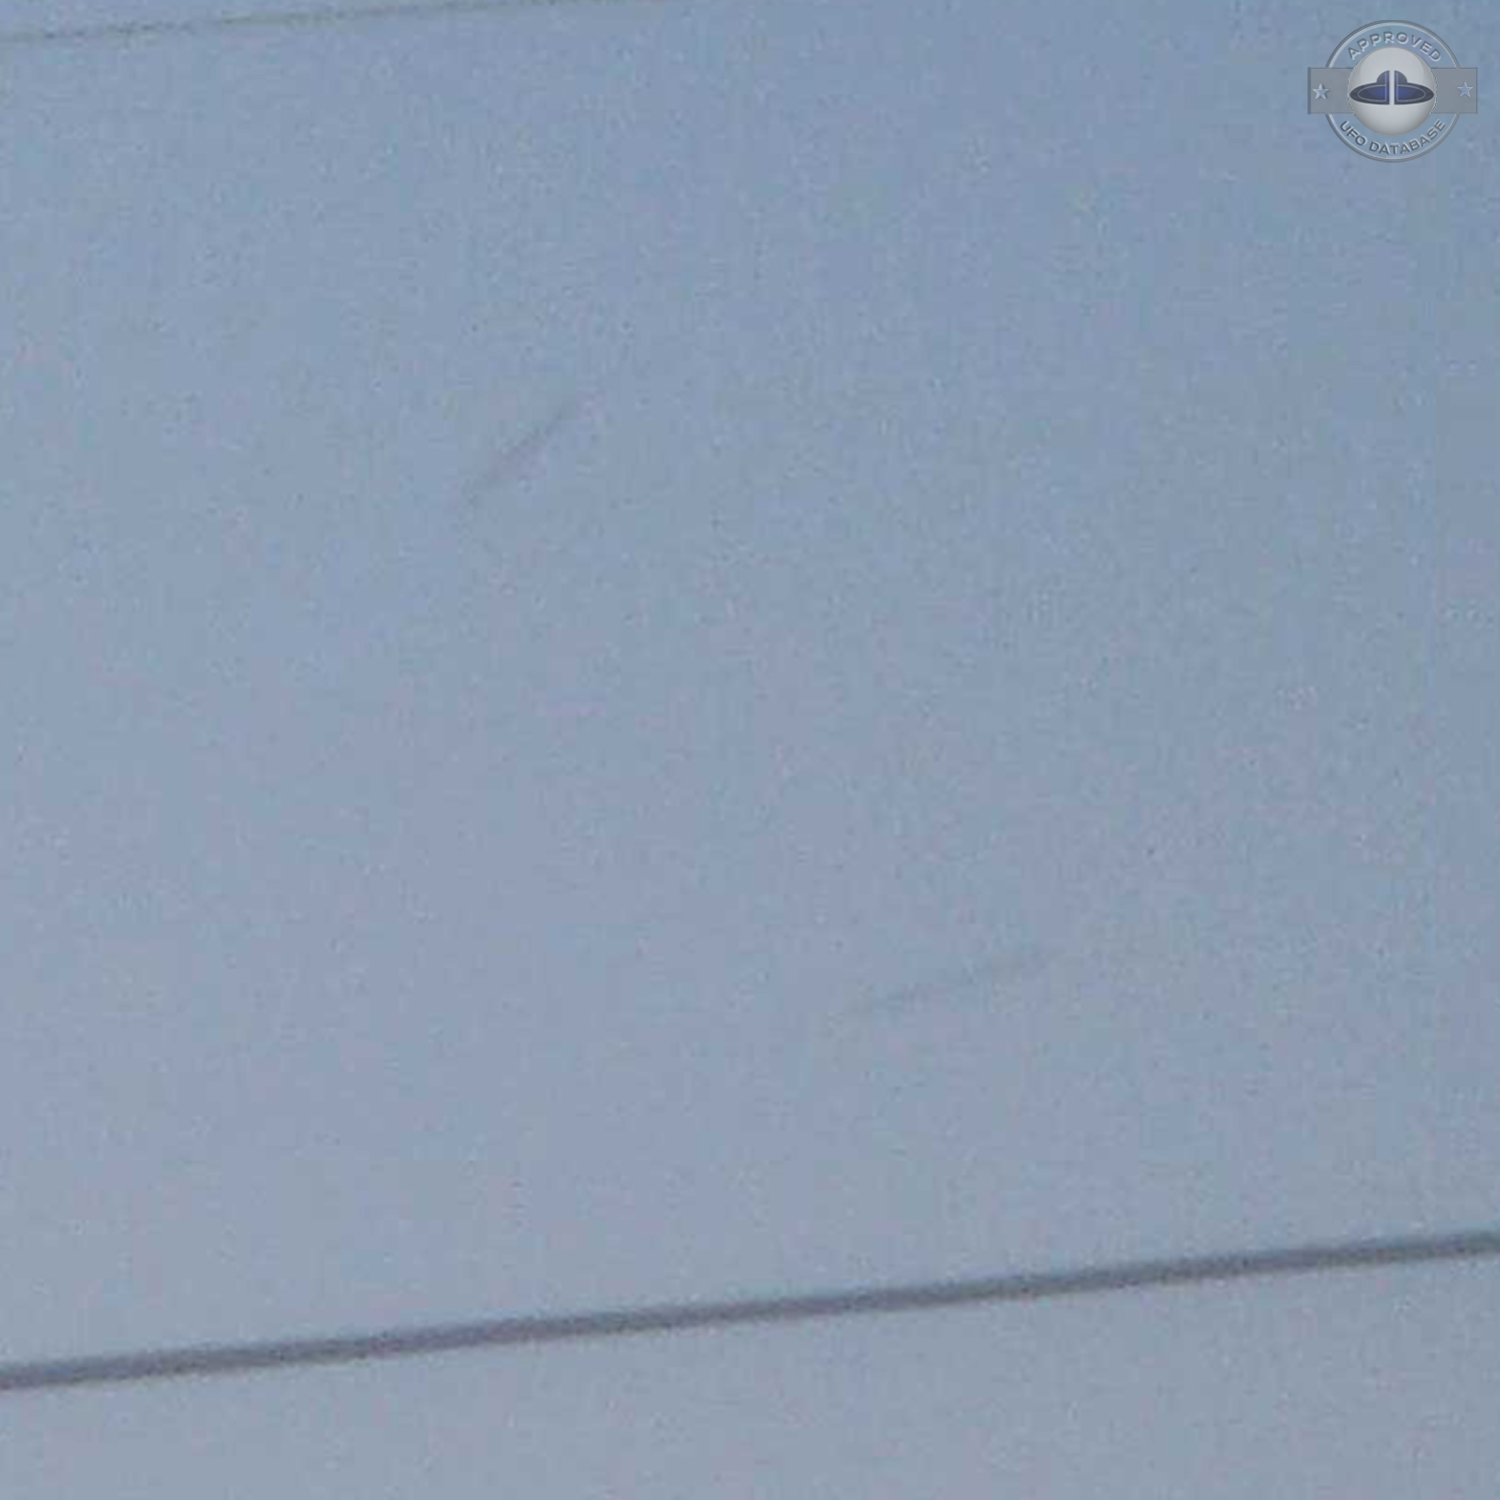 Many UFO sightings in Lebanon vilage got citizens to open their minds  UFO Picture #438-7